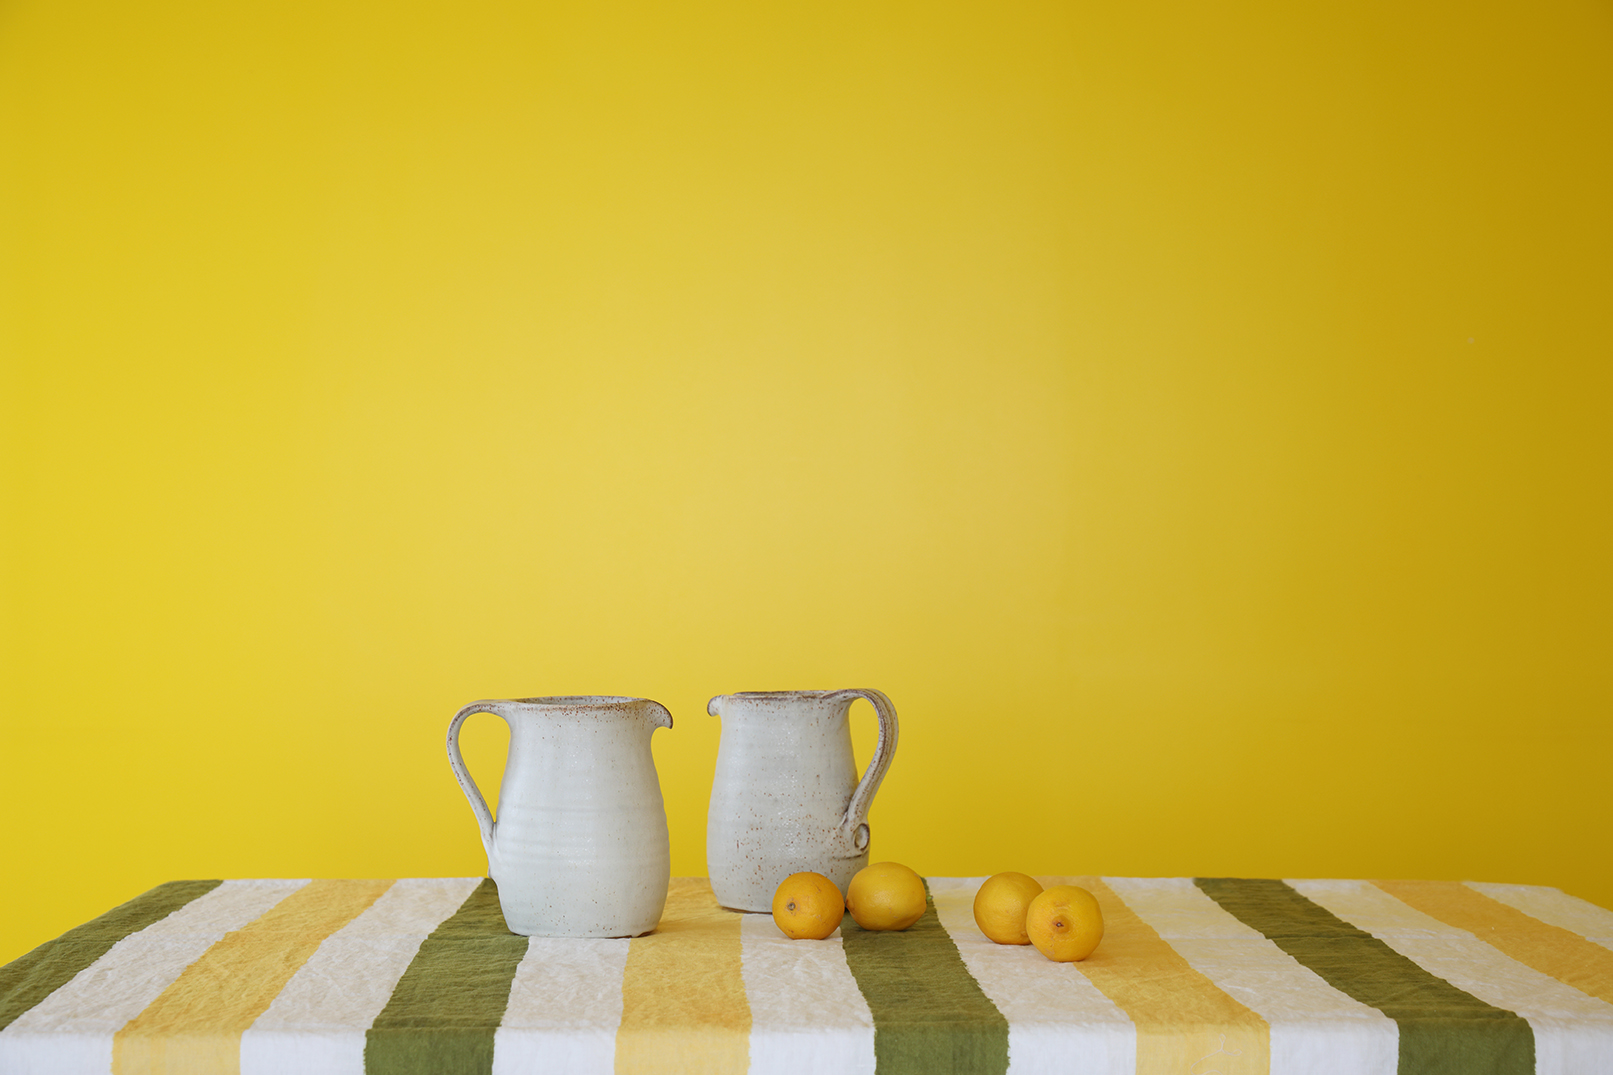 Two cream earthenware jugs and some lemons on a green and yellow striped tablecloth against a bright yellow backdrop